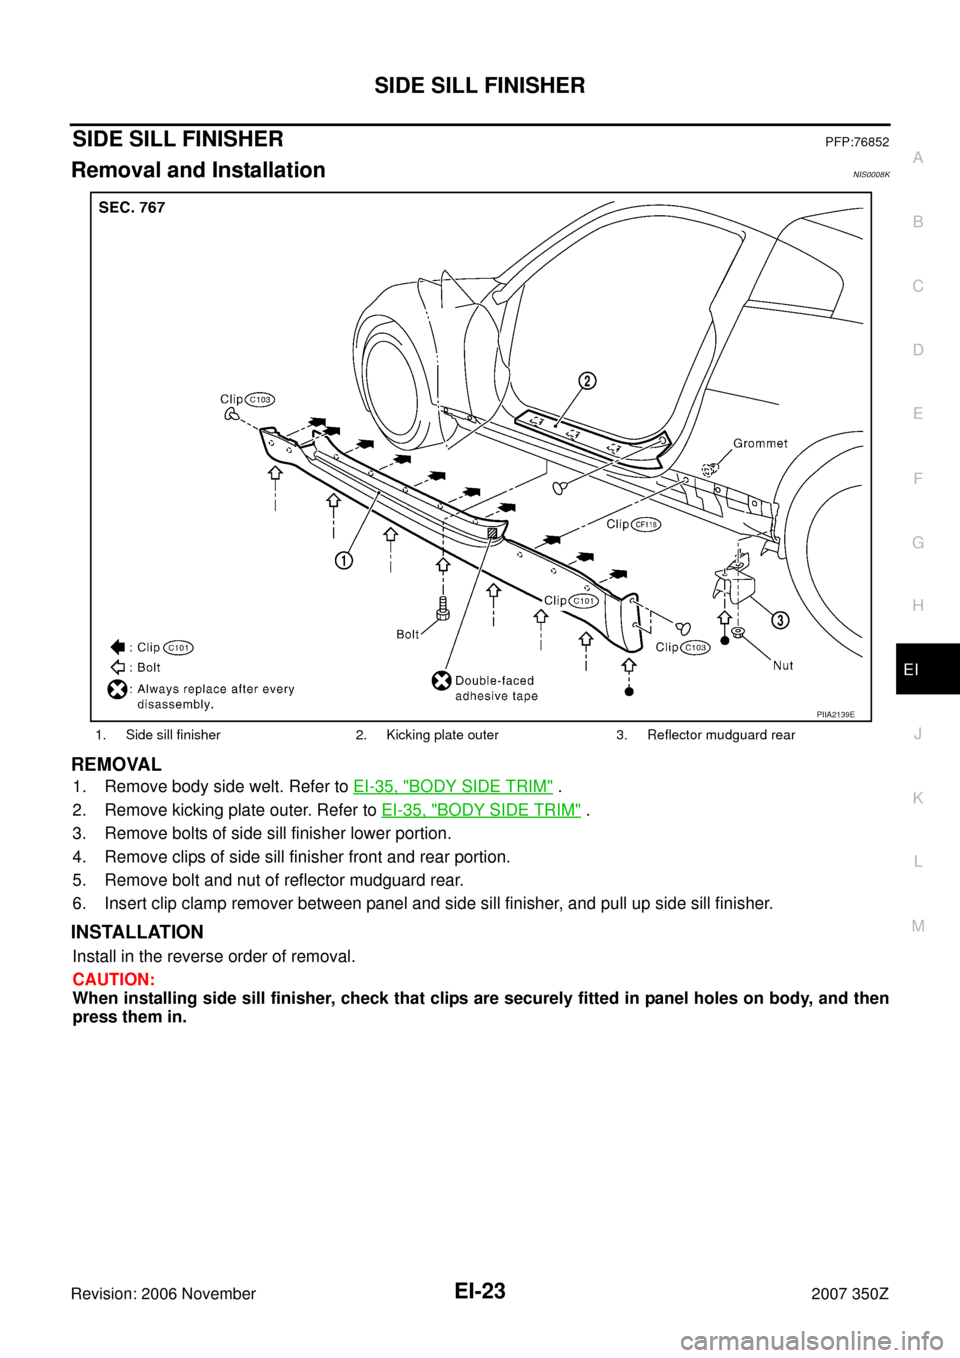 NISSAN 350Z 2007 Z33 Exterior And Interior Workshop Manual SIDE SILL FINISHER
EI-23
C
D
E
F
G
H
J
K
L
MA
B
EI
Revision: 2006 November2007 350Z
SIDE SILL FINISHERPFP:76852
Removal and InstallationNIS0008K
REMOVAL
1. Remove body side welt. Refer to EI-35, "BODY